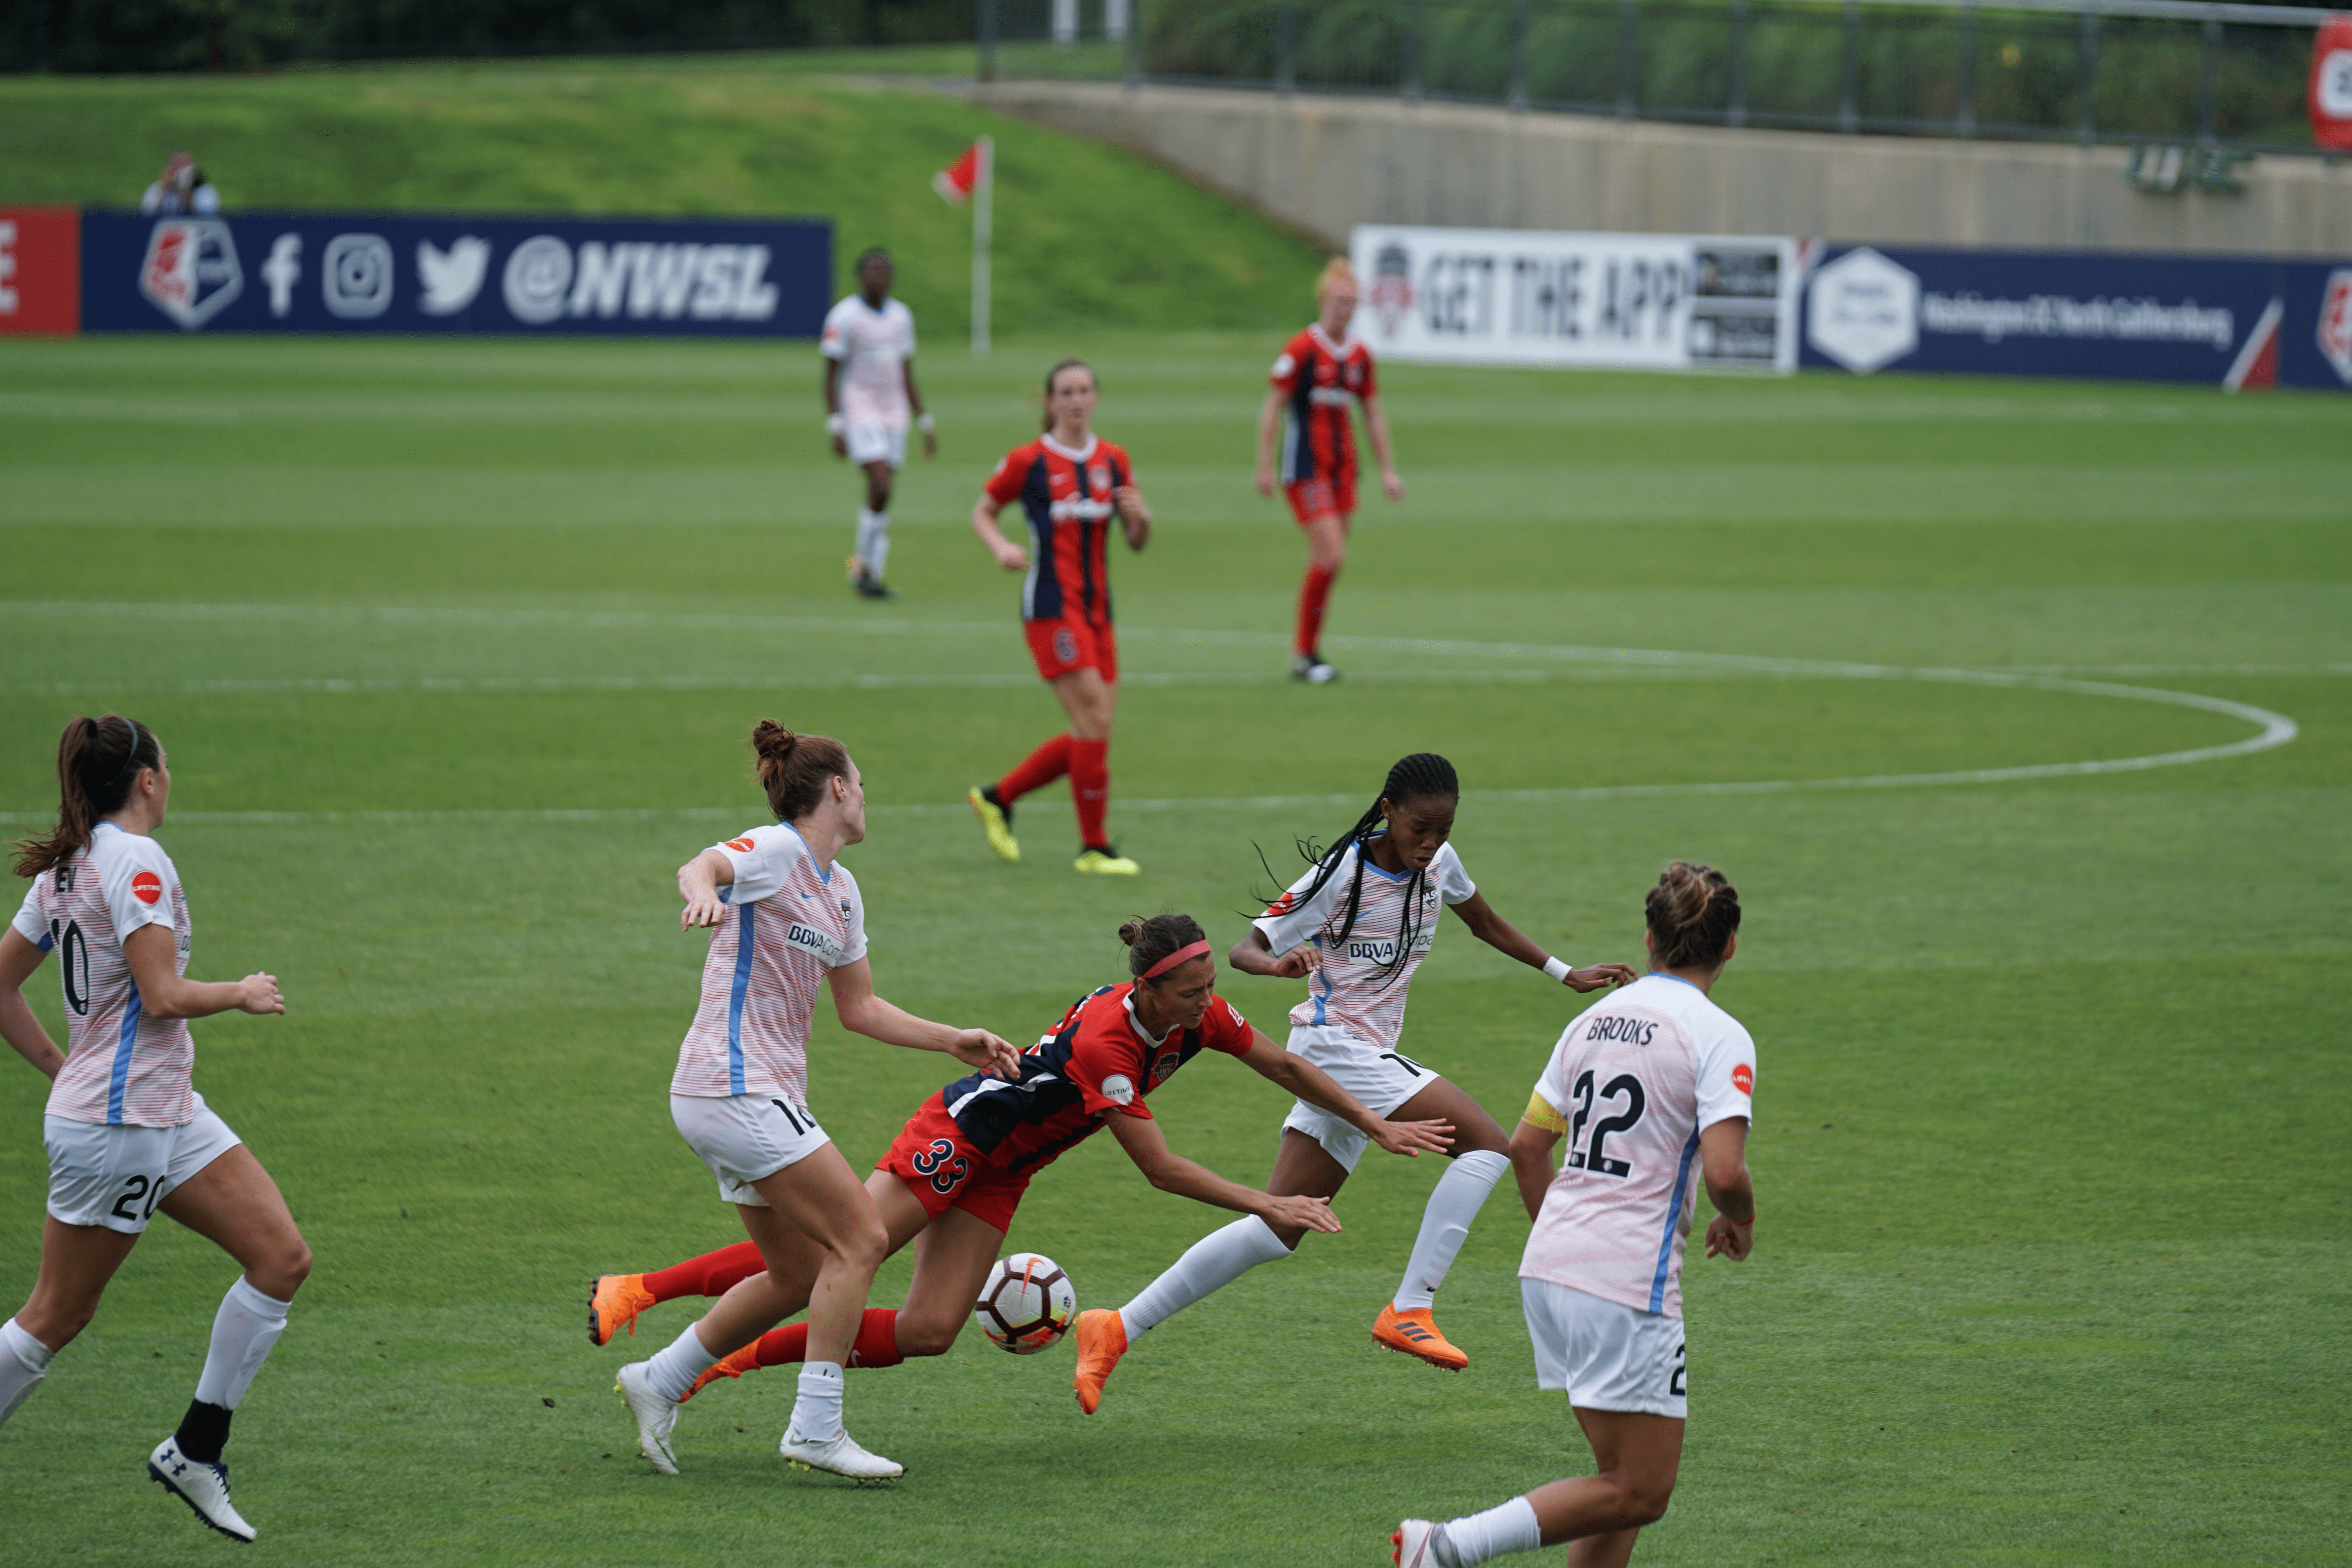 Women playing soccer on an outdoor pitch.